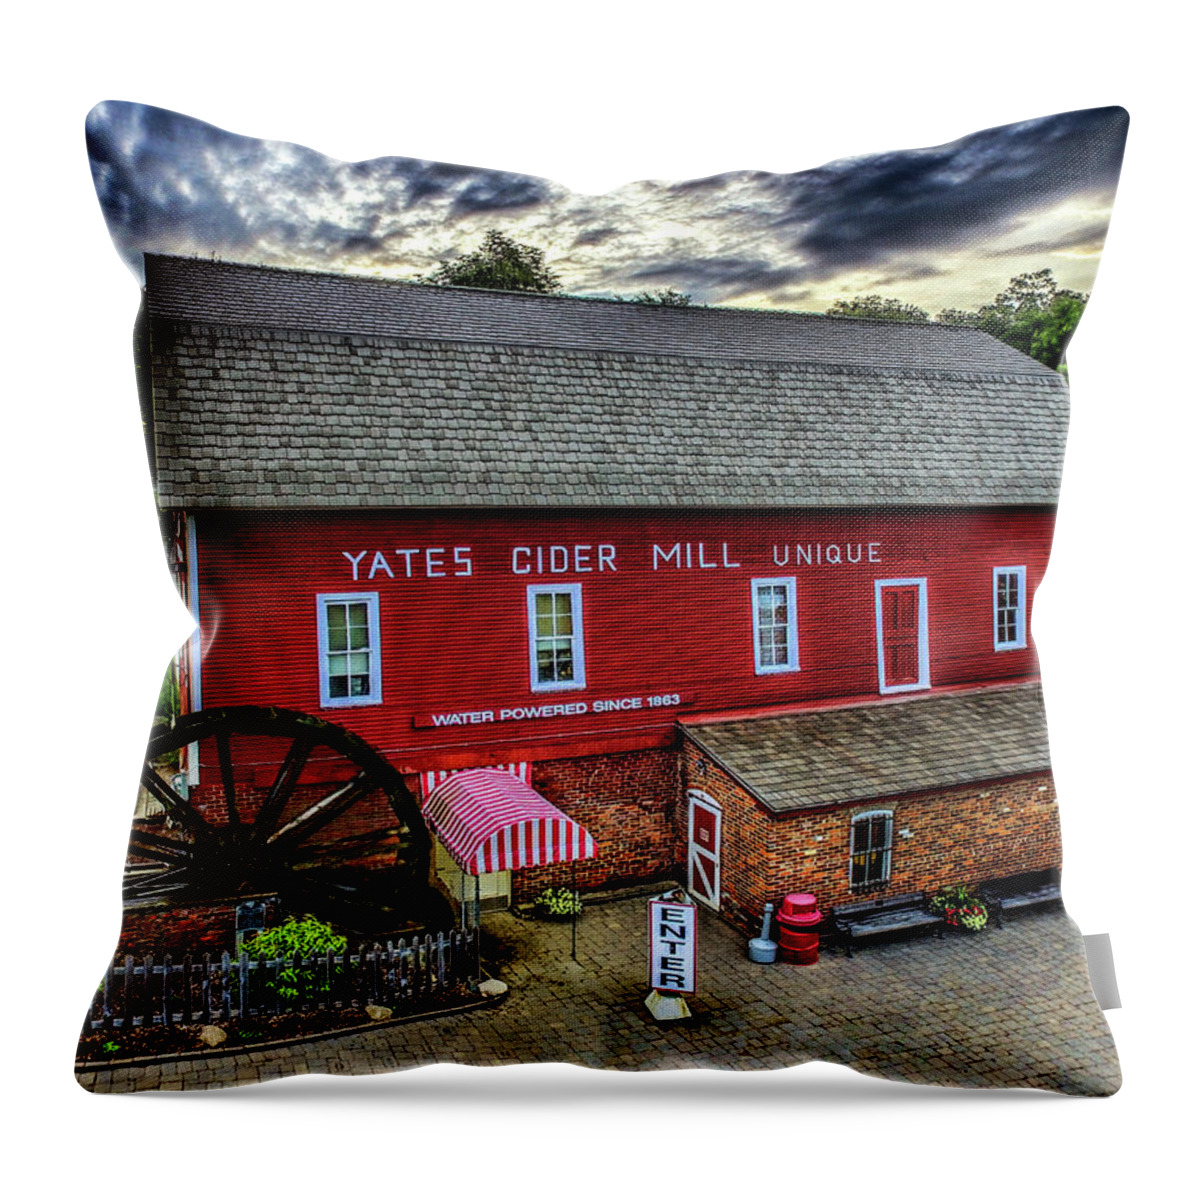 Rochester Throw Pillow featuring the digital art Yates Cider Mill DJI_0072 by Michael Thomas